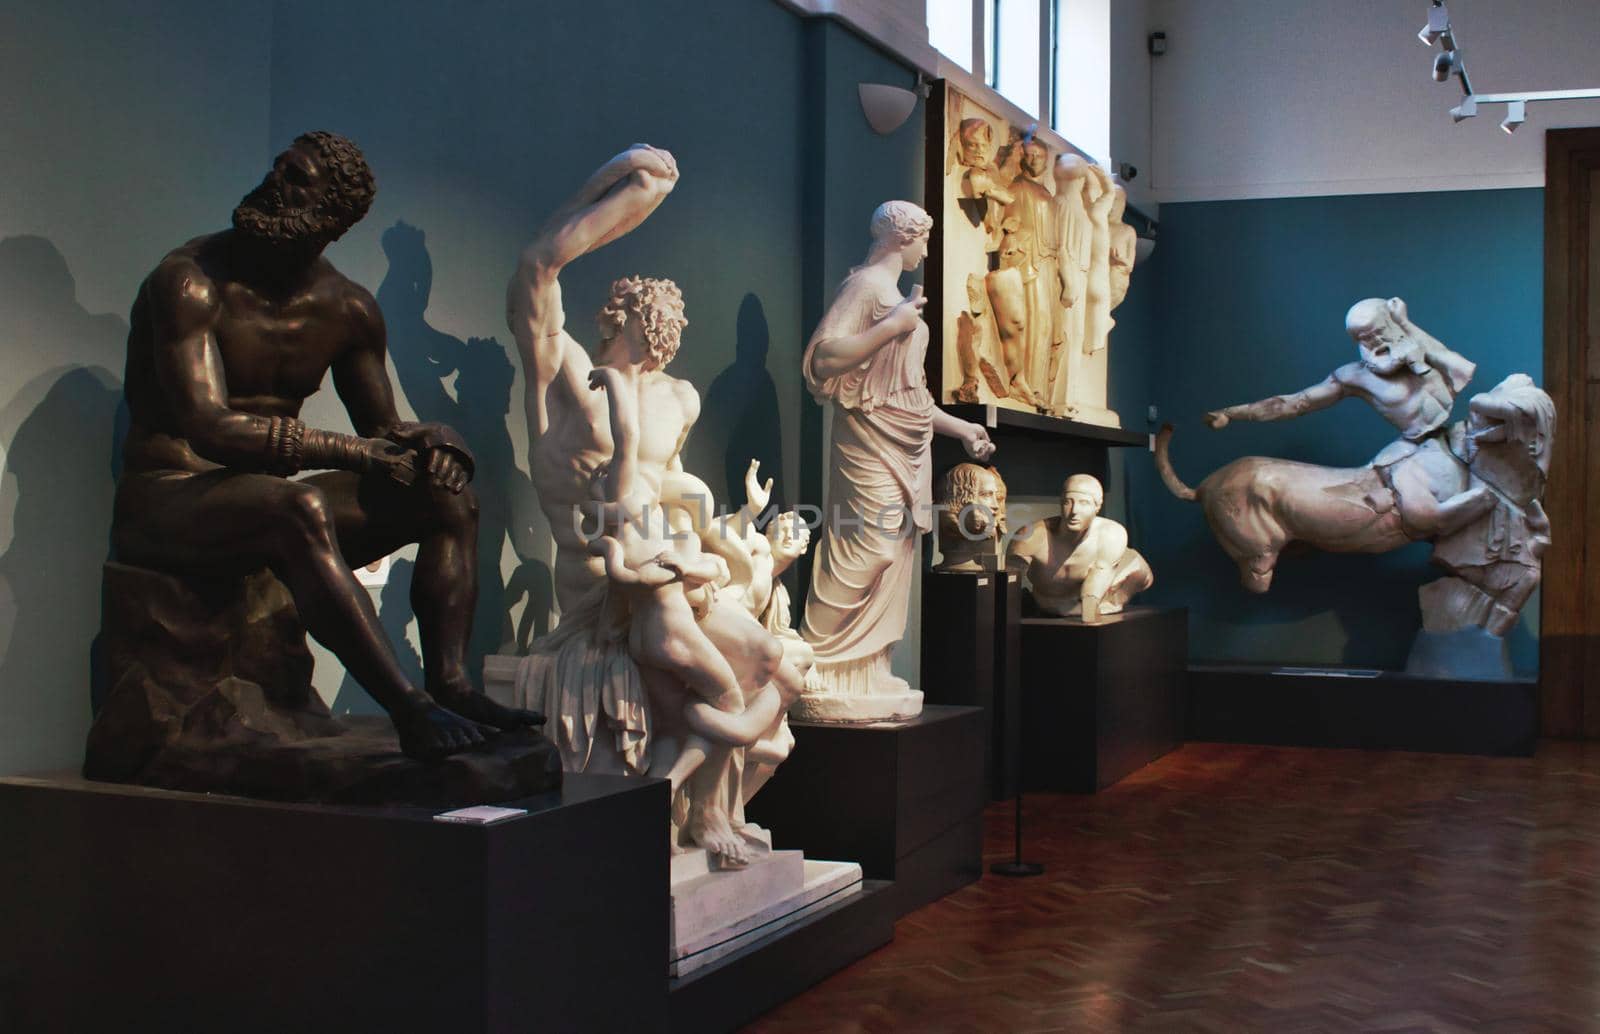 Oxford, UK - March 02 2020: Marble and bronze statues on display in the Ashmolean Museum in Oxford, England by tennesseewitney